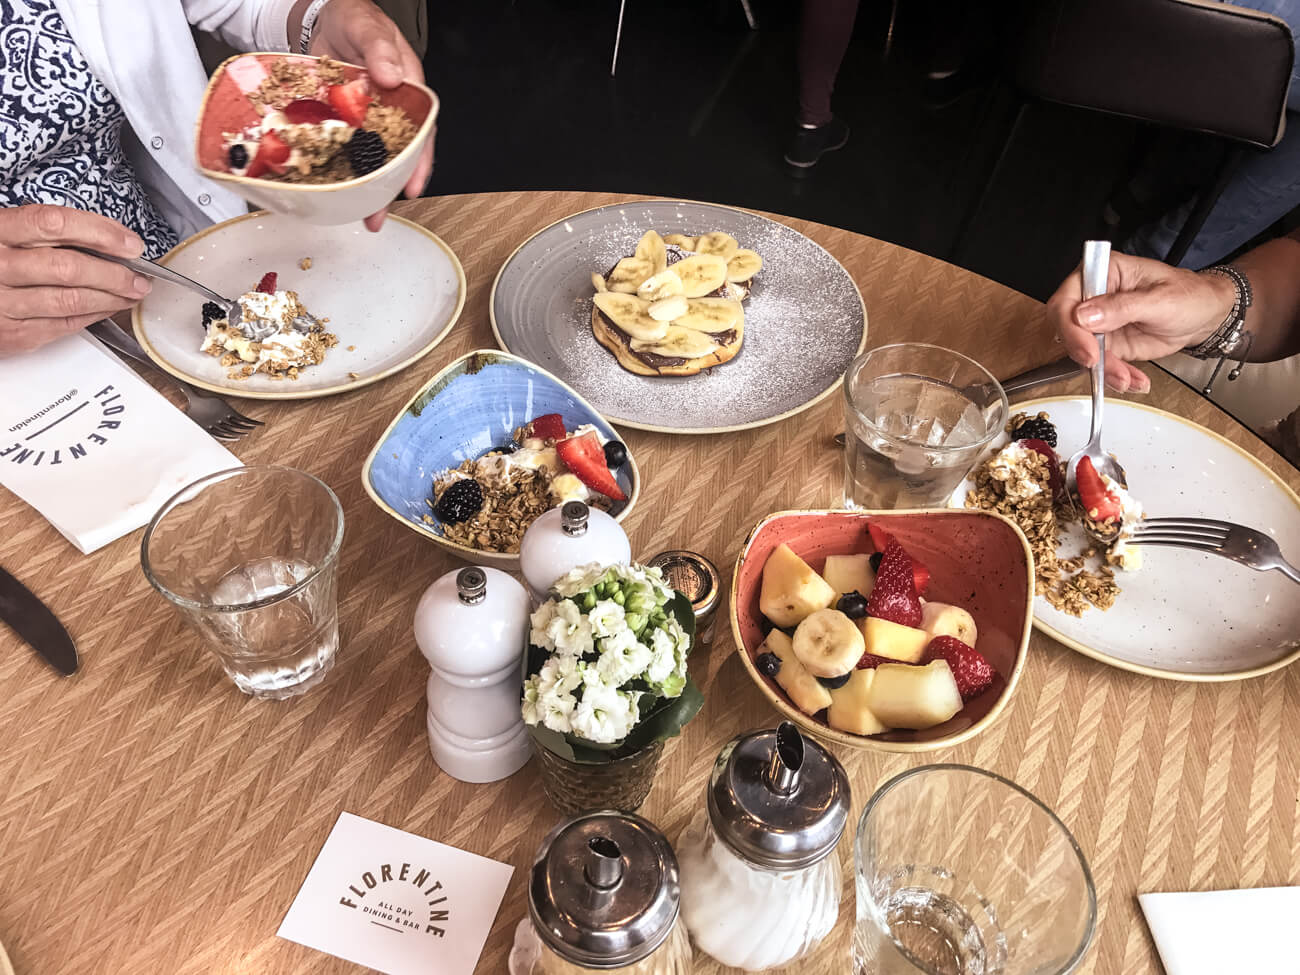 Bottomless brunch at The Florentine, Lambeth North | Where's Mollie? A Travel and Adventure Lifestyle Blog